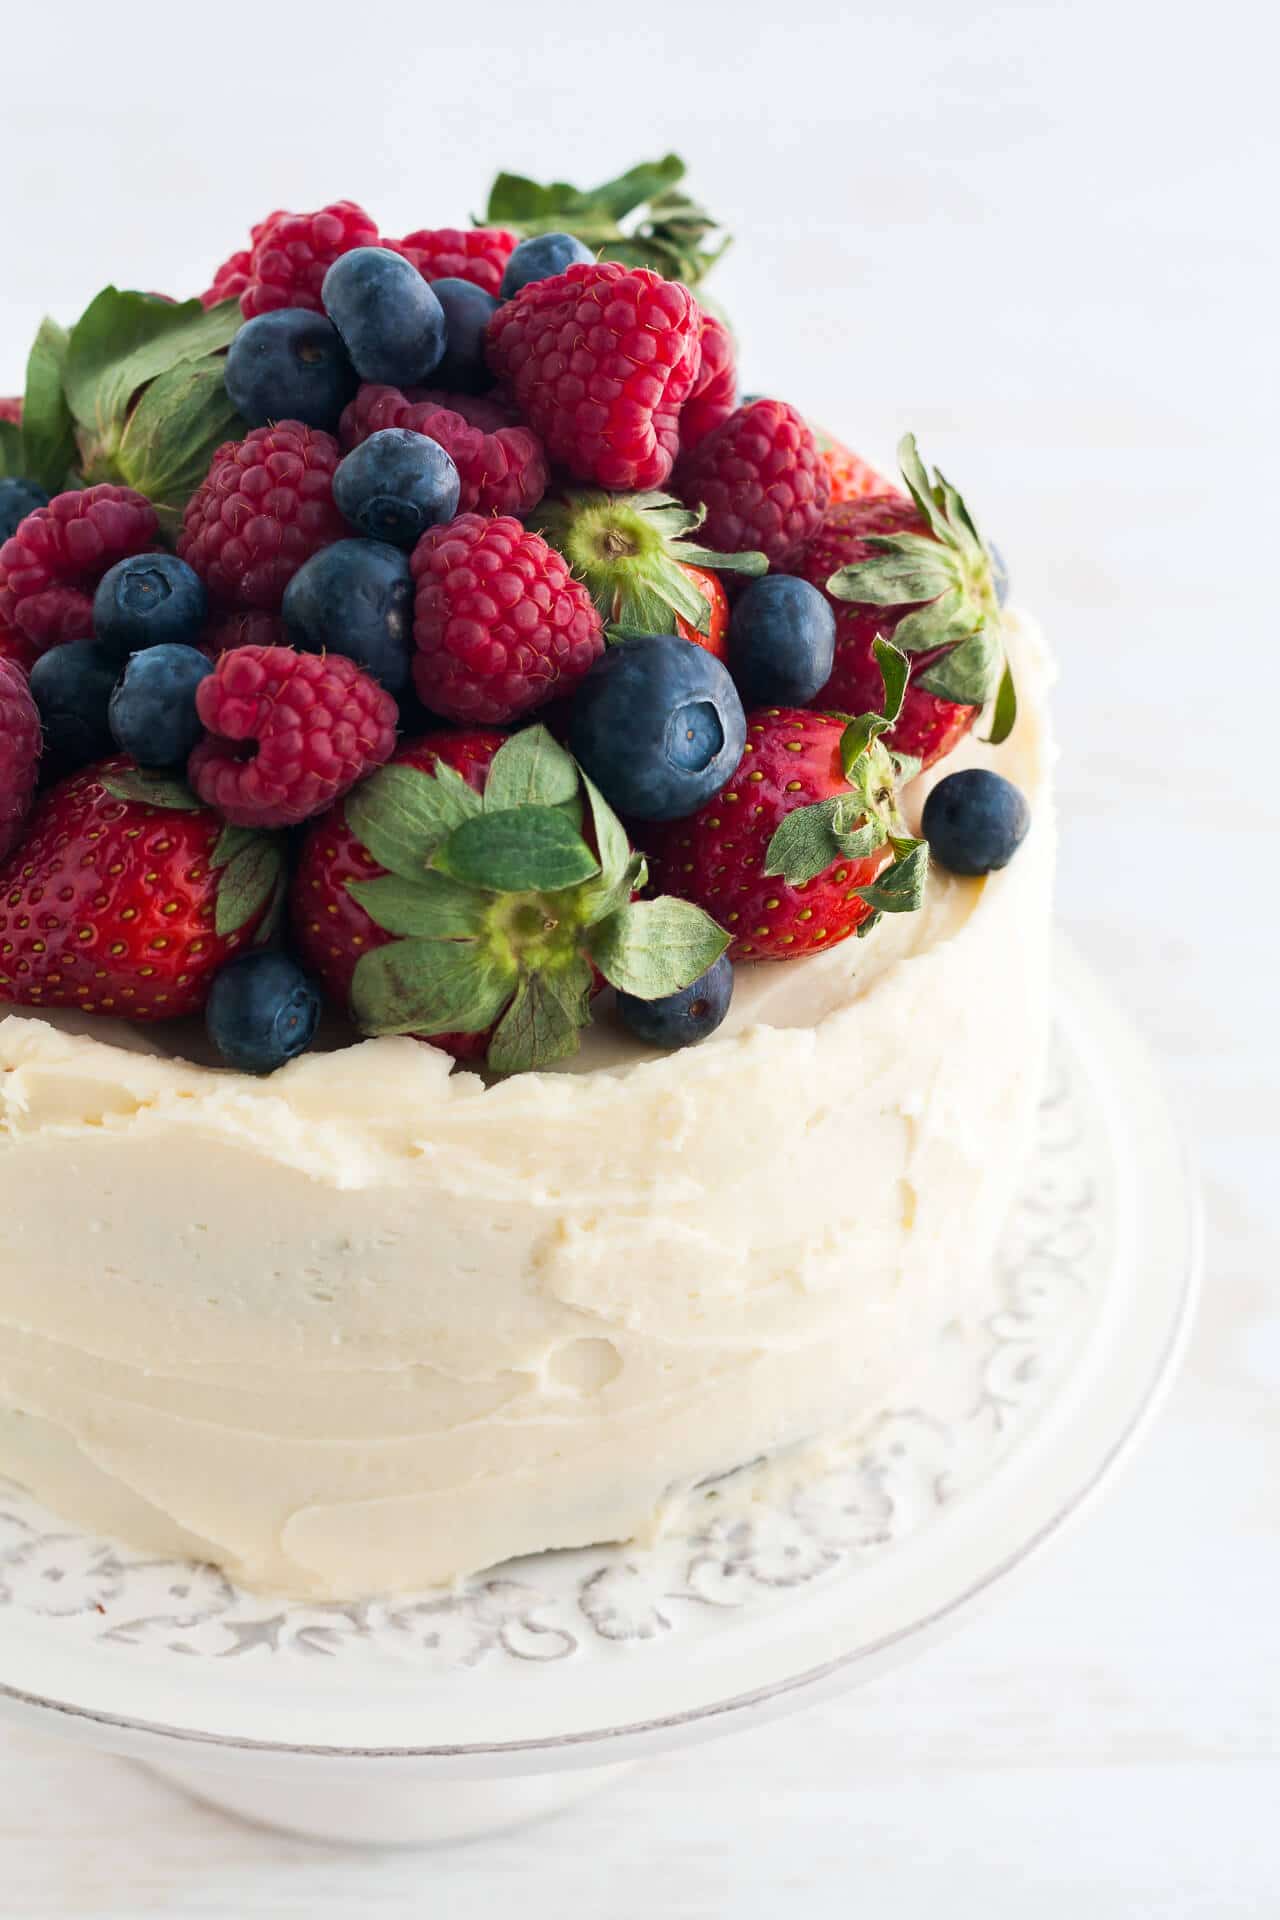 Chocolate layer cake with cream cheese frosting and berries.